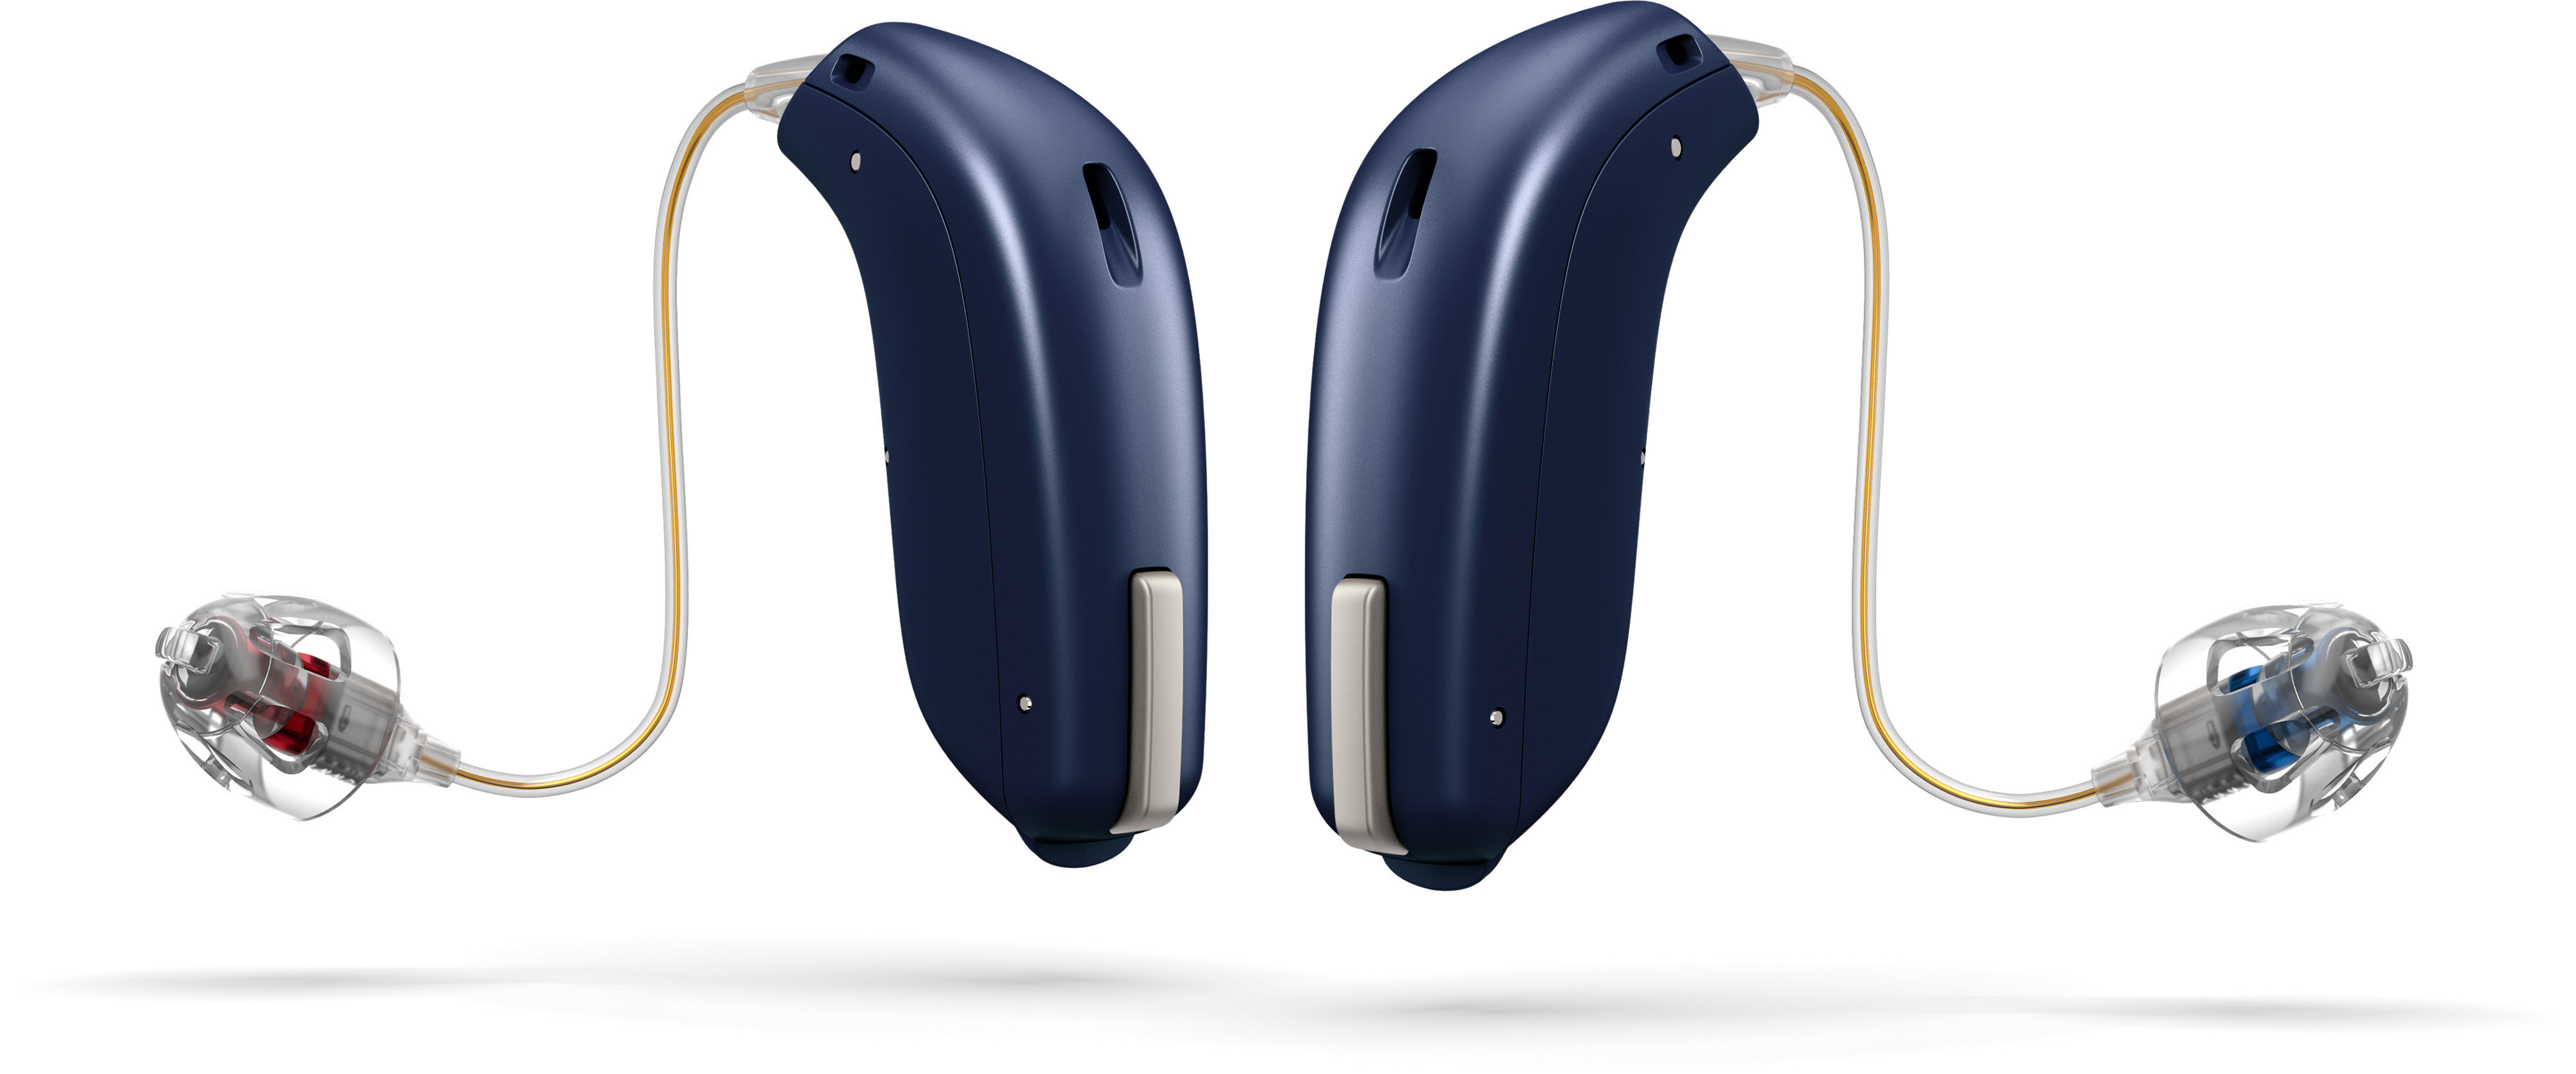 oticon-hearing-aids-accessories-lancaster-pa-find-your-fit-here